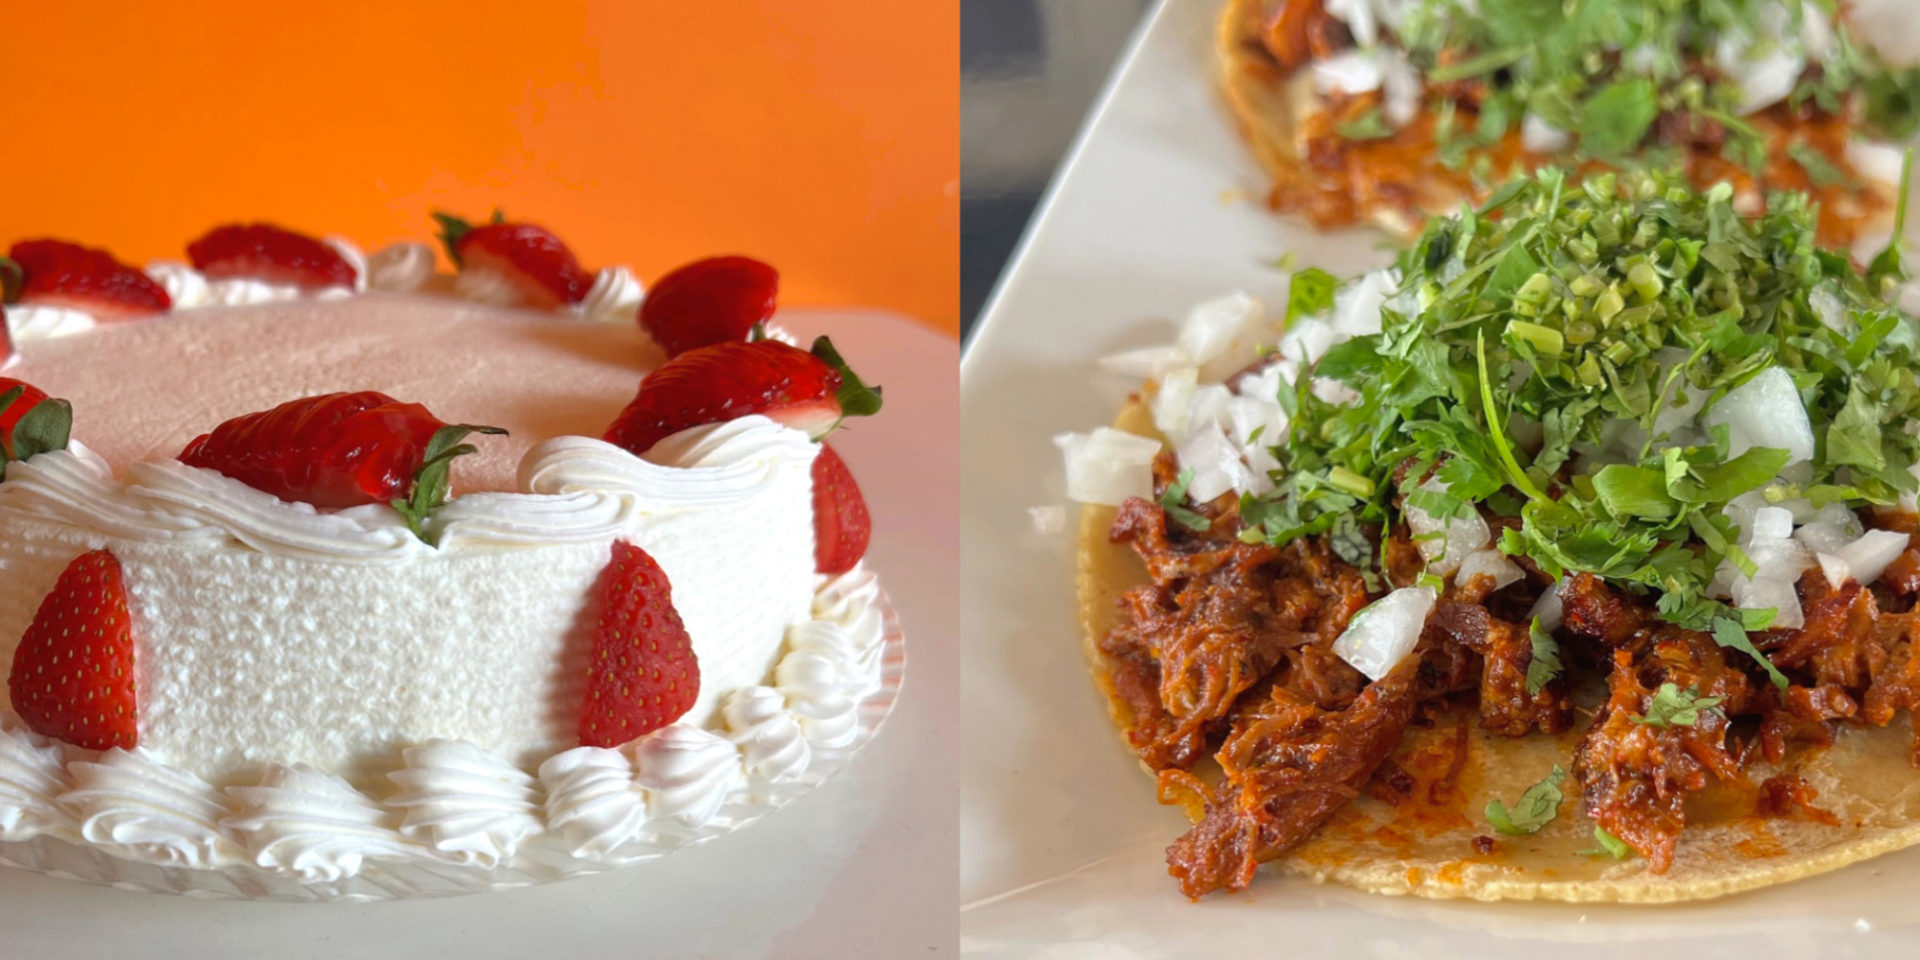 Side by side photos of Rick's Bakery tres leches and Maize taco al pastor